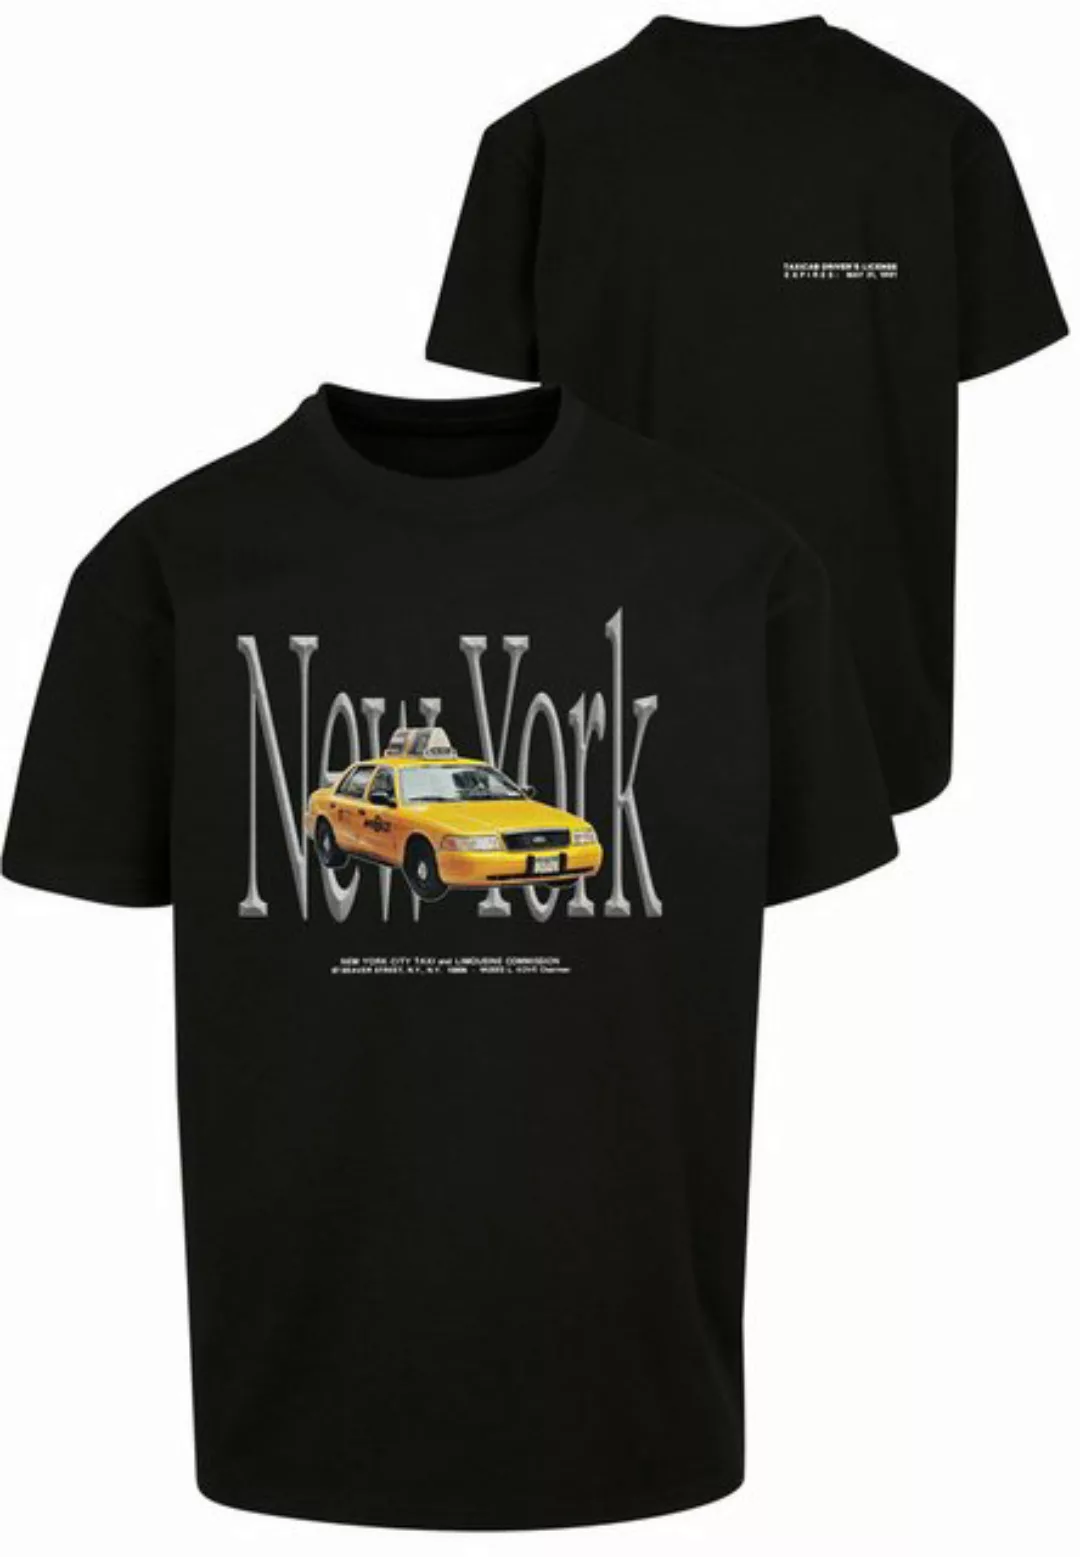 Upscale by Mister Tee T-Shirt Upscale by Mister Tee Herren NY Taxi Oversize günstig online kaufen